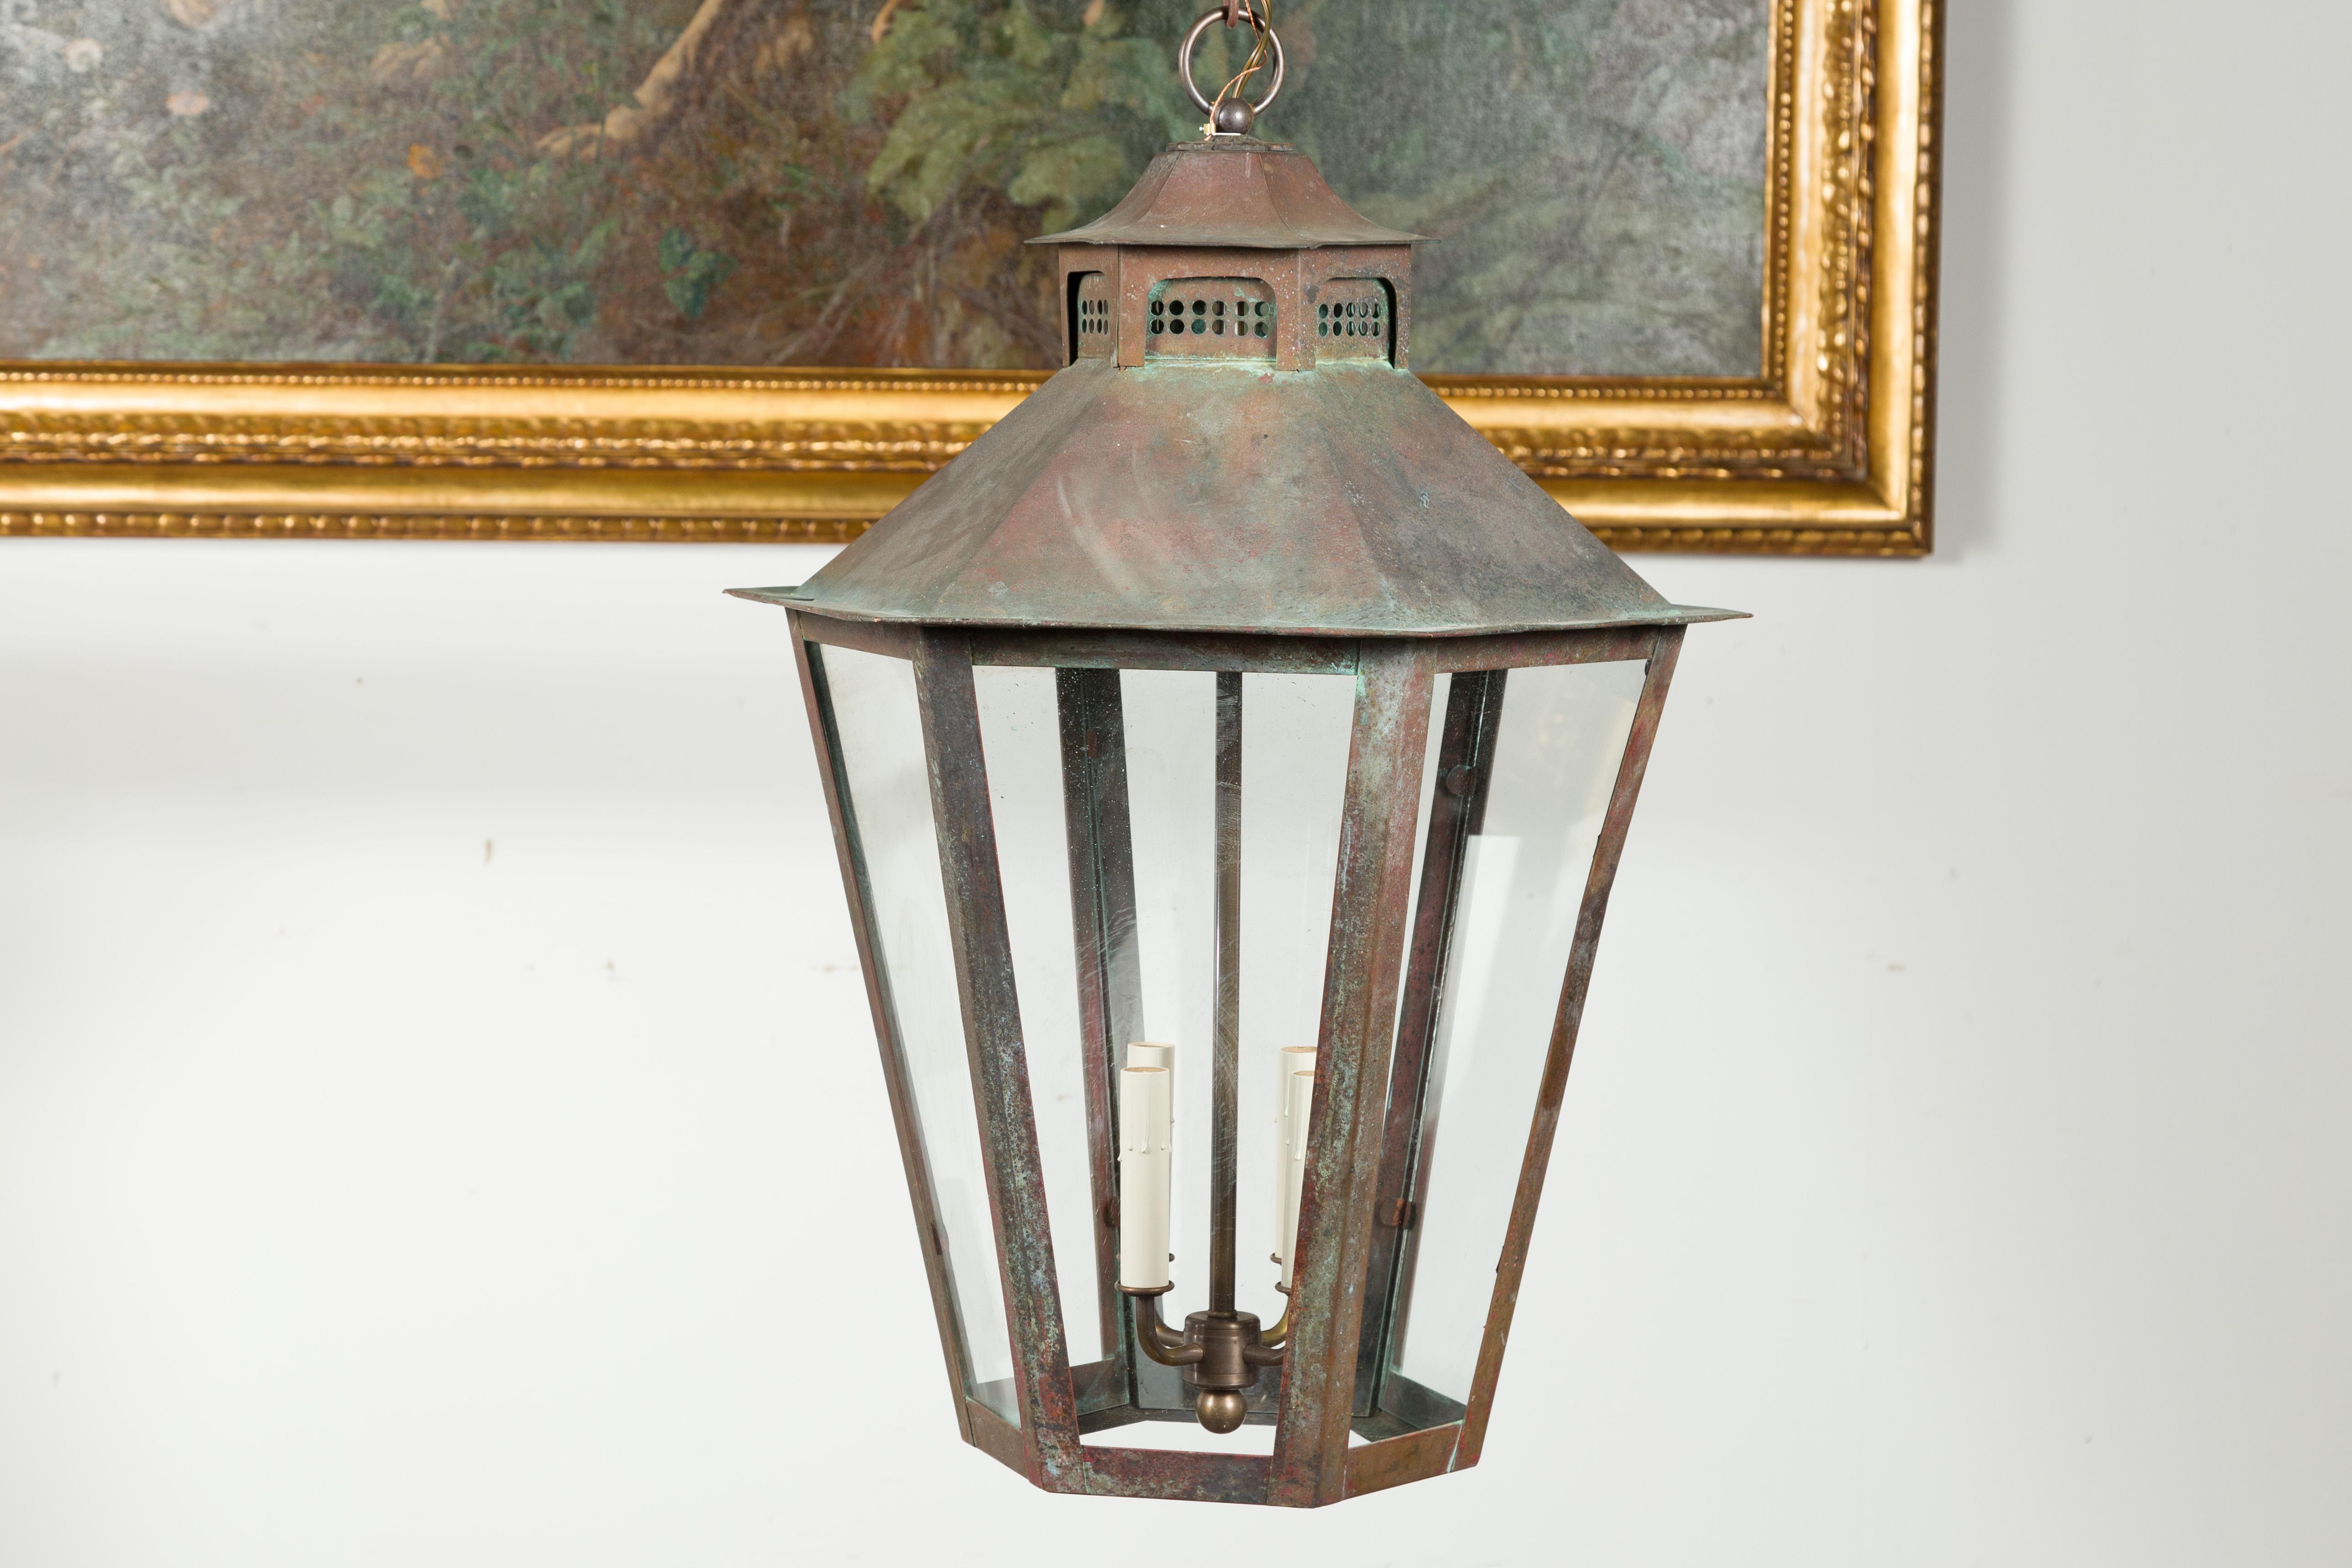 A pair of English turn of the century four-light hexagonal copper lanterns from the early 20th century, with glass panels. Created in England during the turn of the century, each of this pair of copper lanterns attracts our attention with their